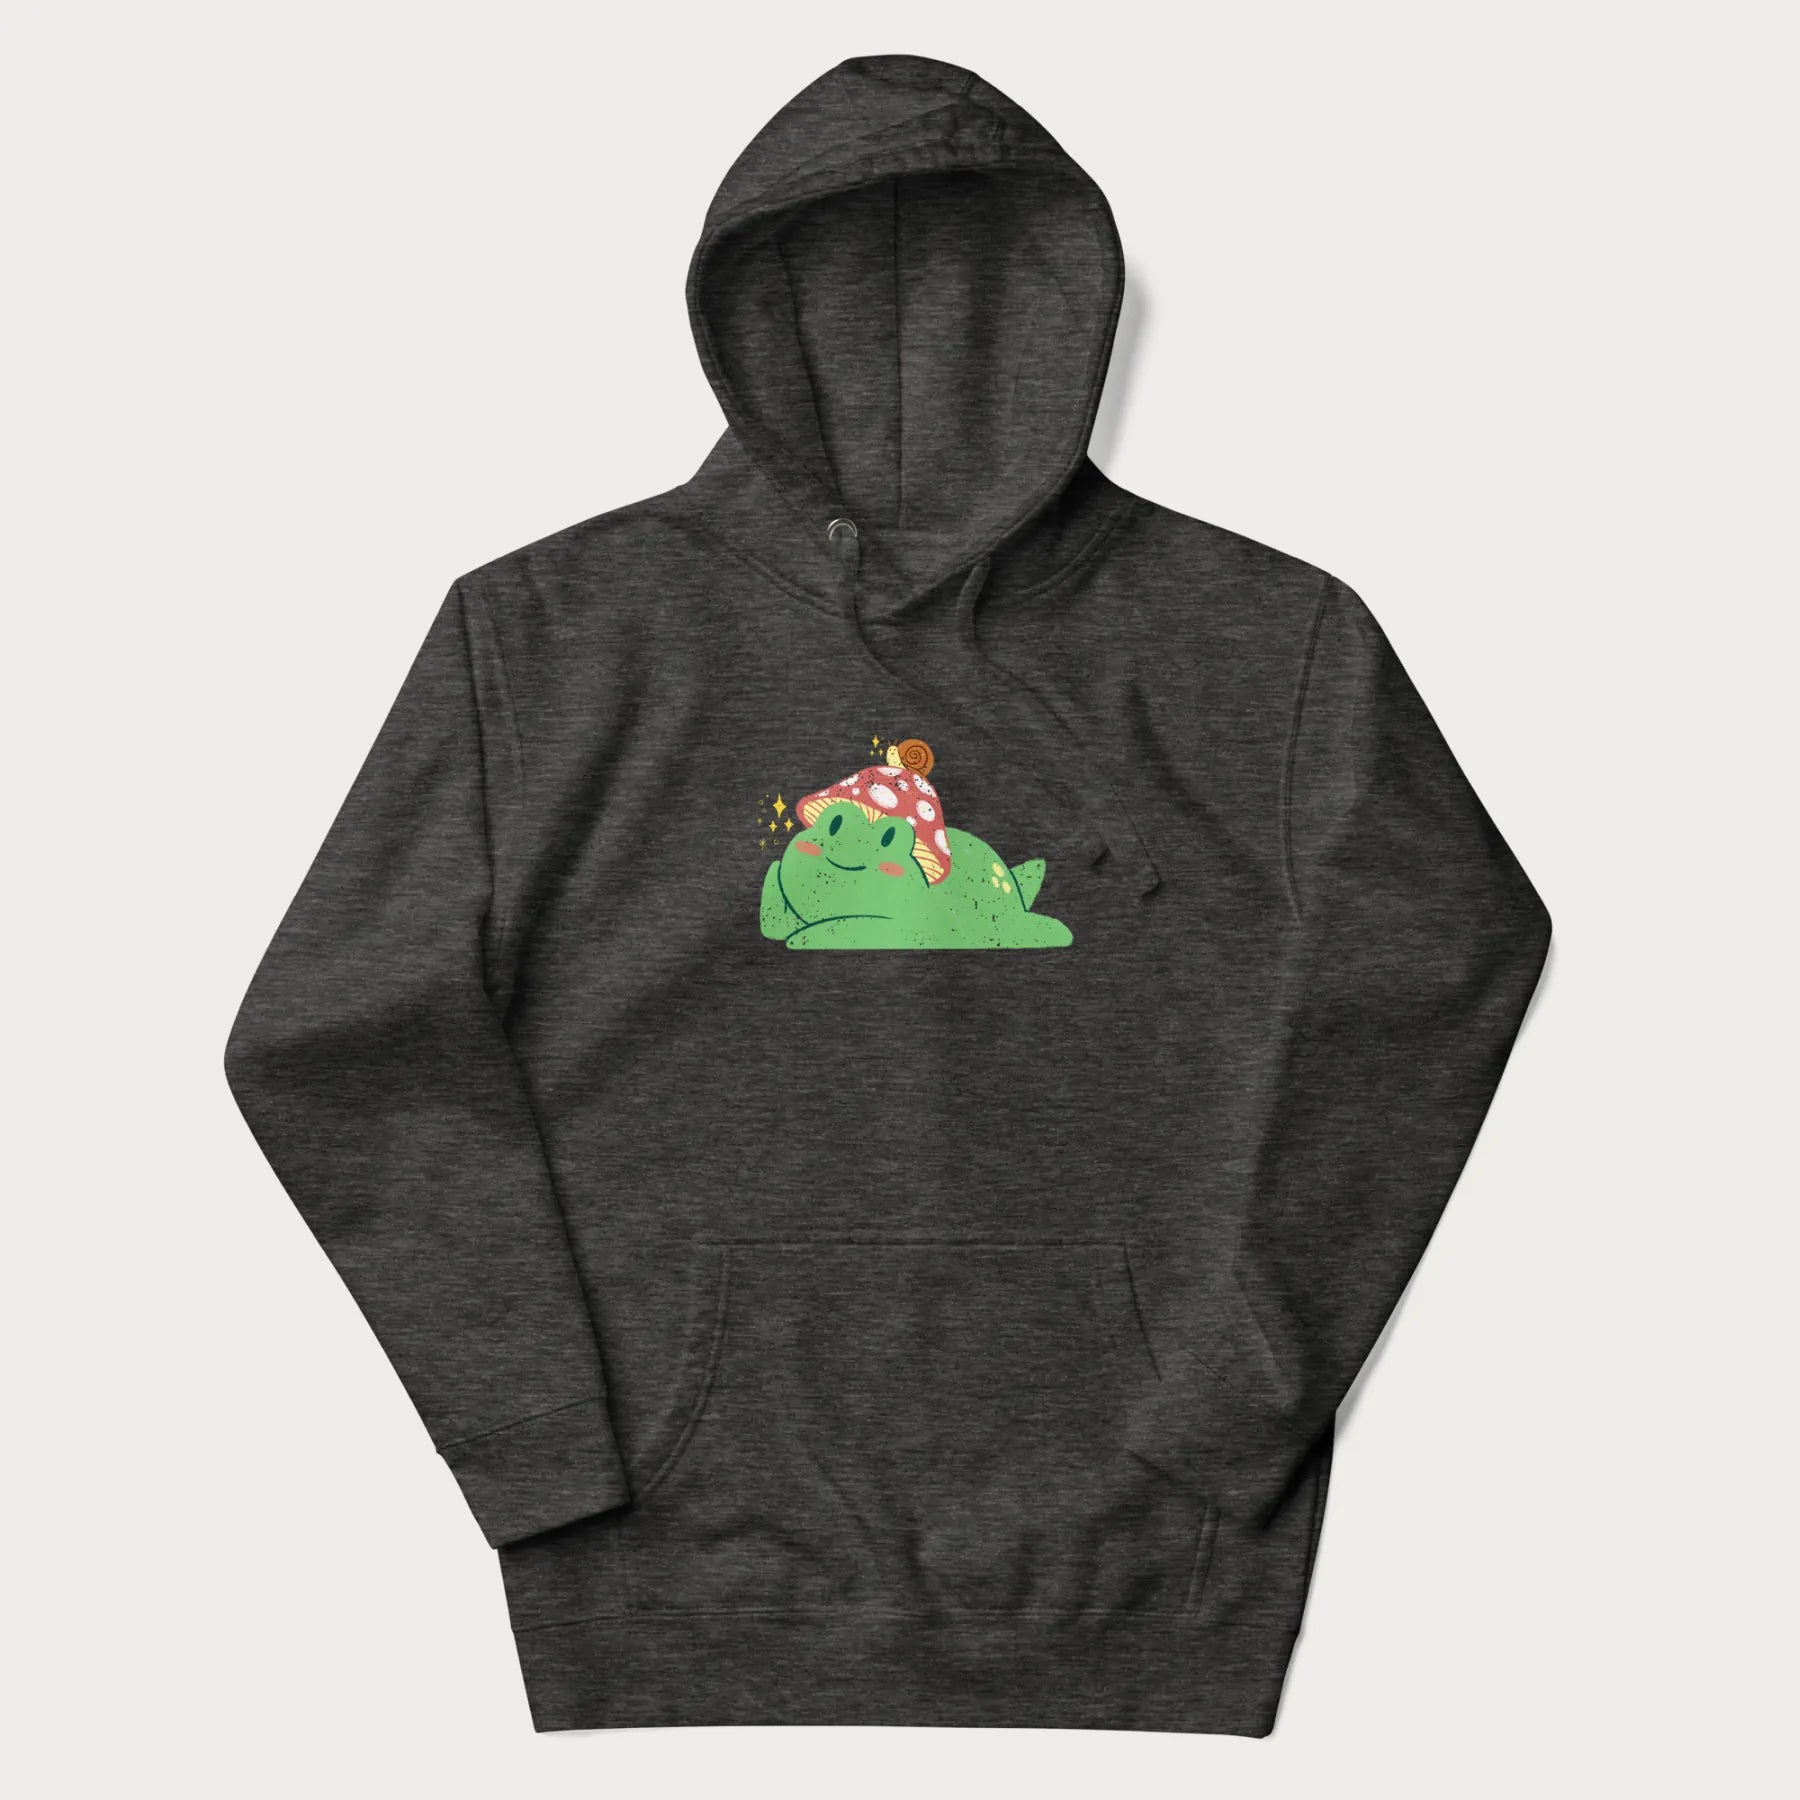 Dark grey hoodie with a cottagecore design of a green frog wearing a mushroom cap and a snail on top.